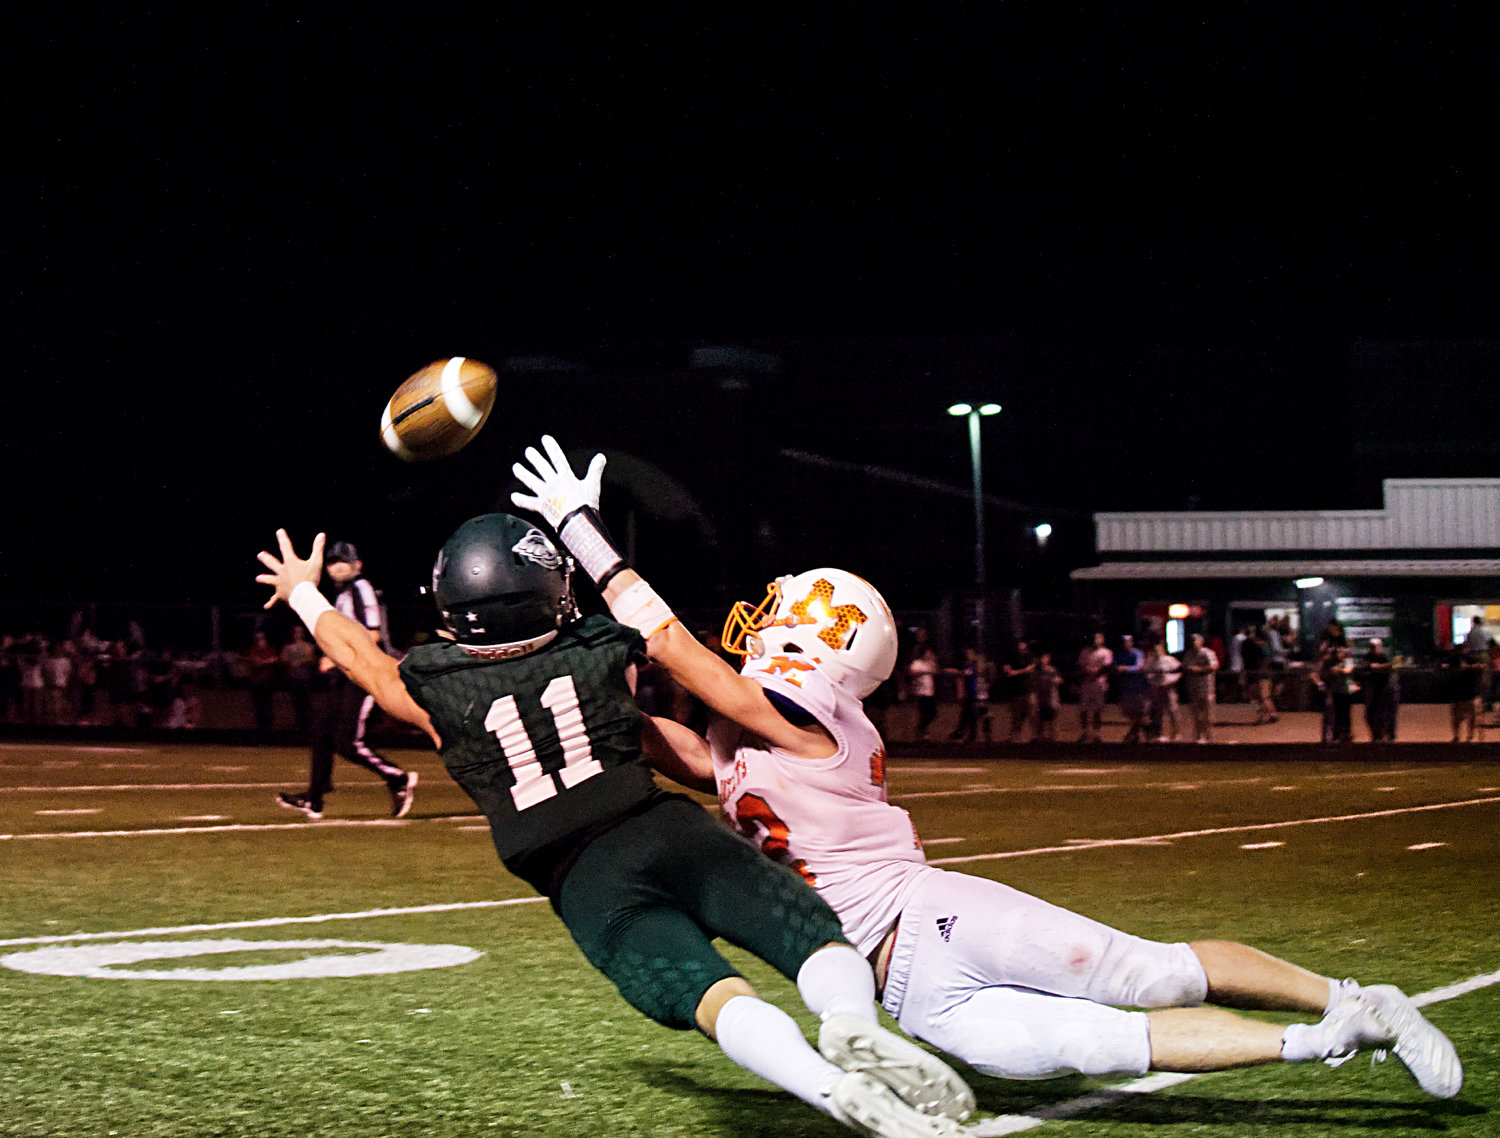 Dawson Pendergrass lays out for a pass while being tightly guarded on a ball that was just out of reach, a feeling felt fiercely regarding the result of Friday’s close call in Canton.